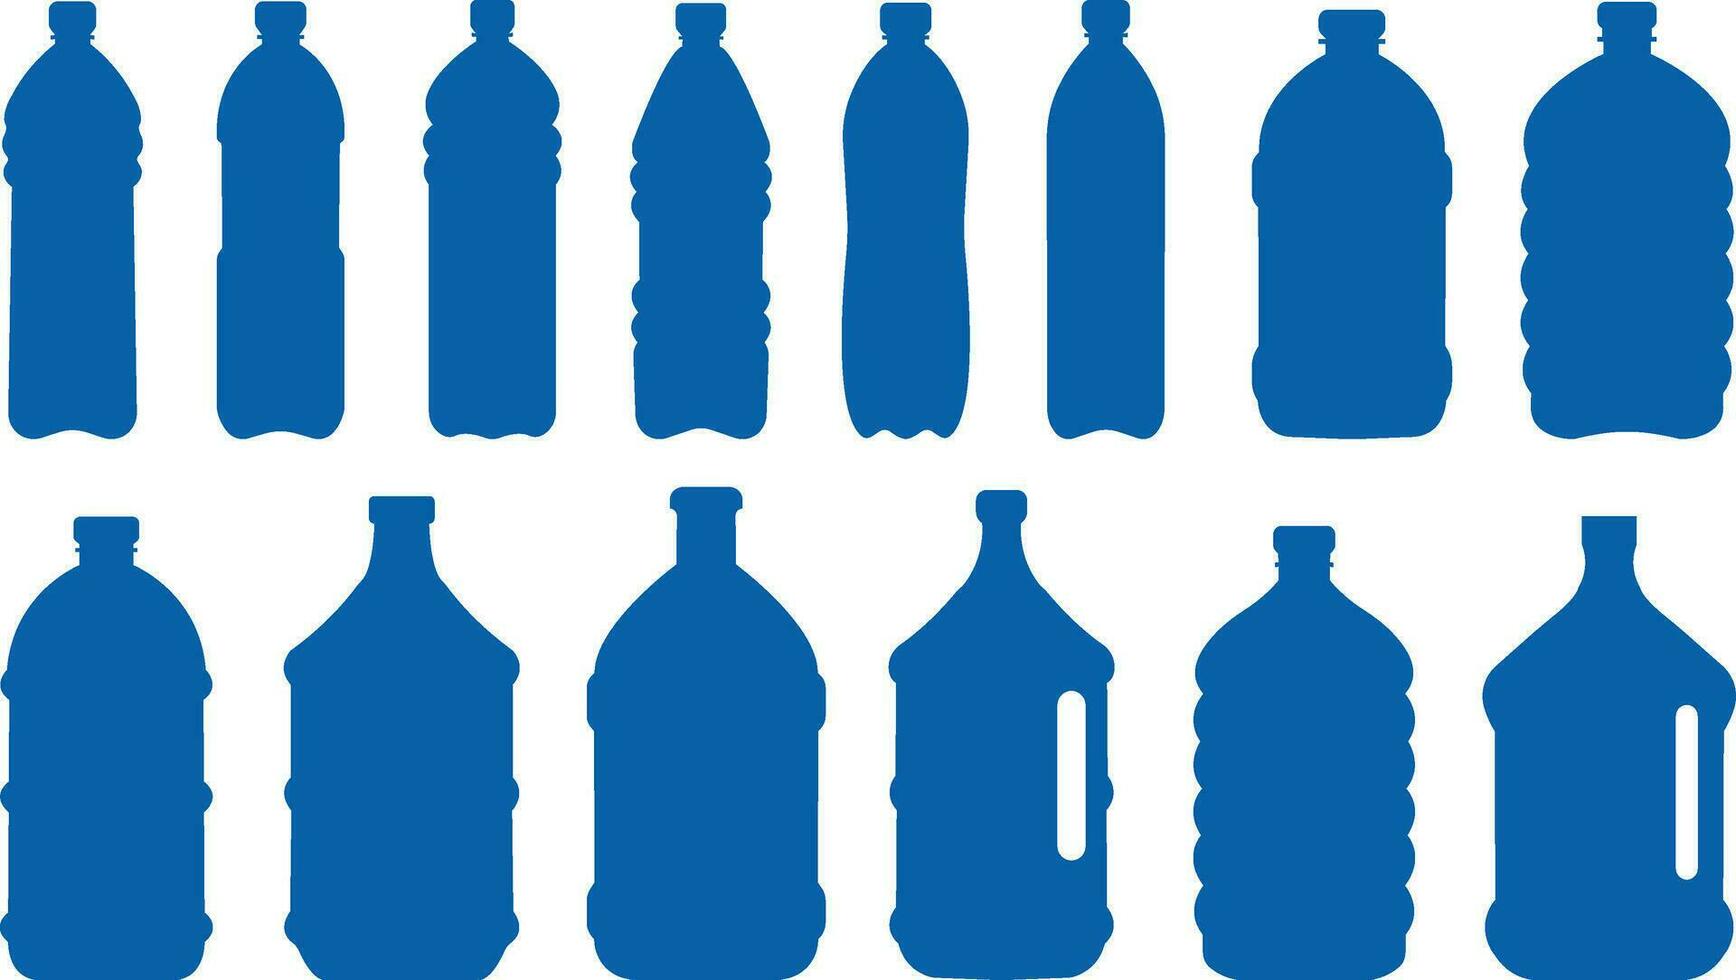 Plastic bottle blue icon set. Vector flat style sign . Container water bottle for sport. Natural and healthy lifestyle concept water bottled container liquid